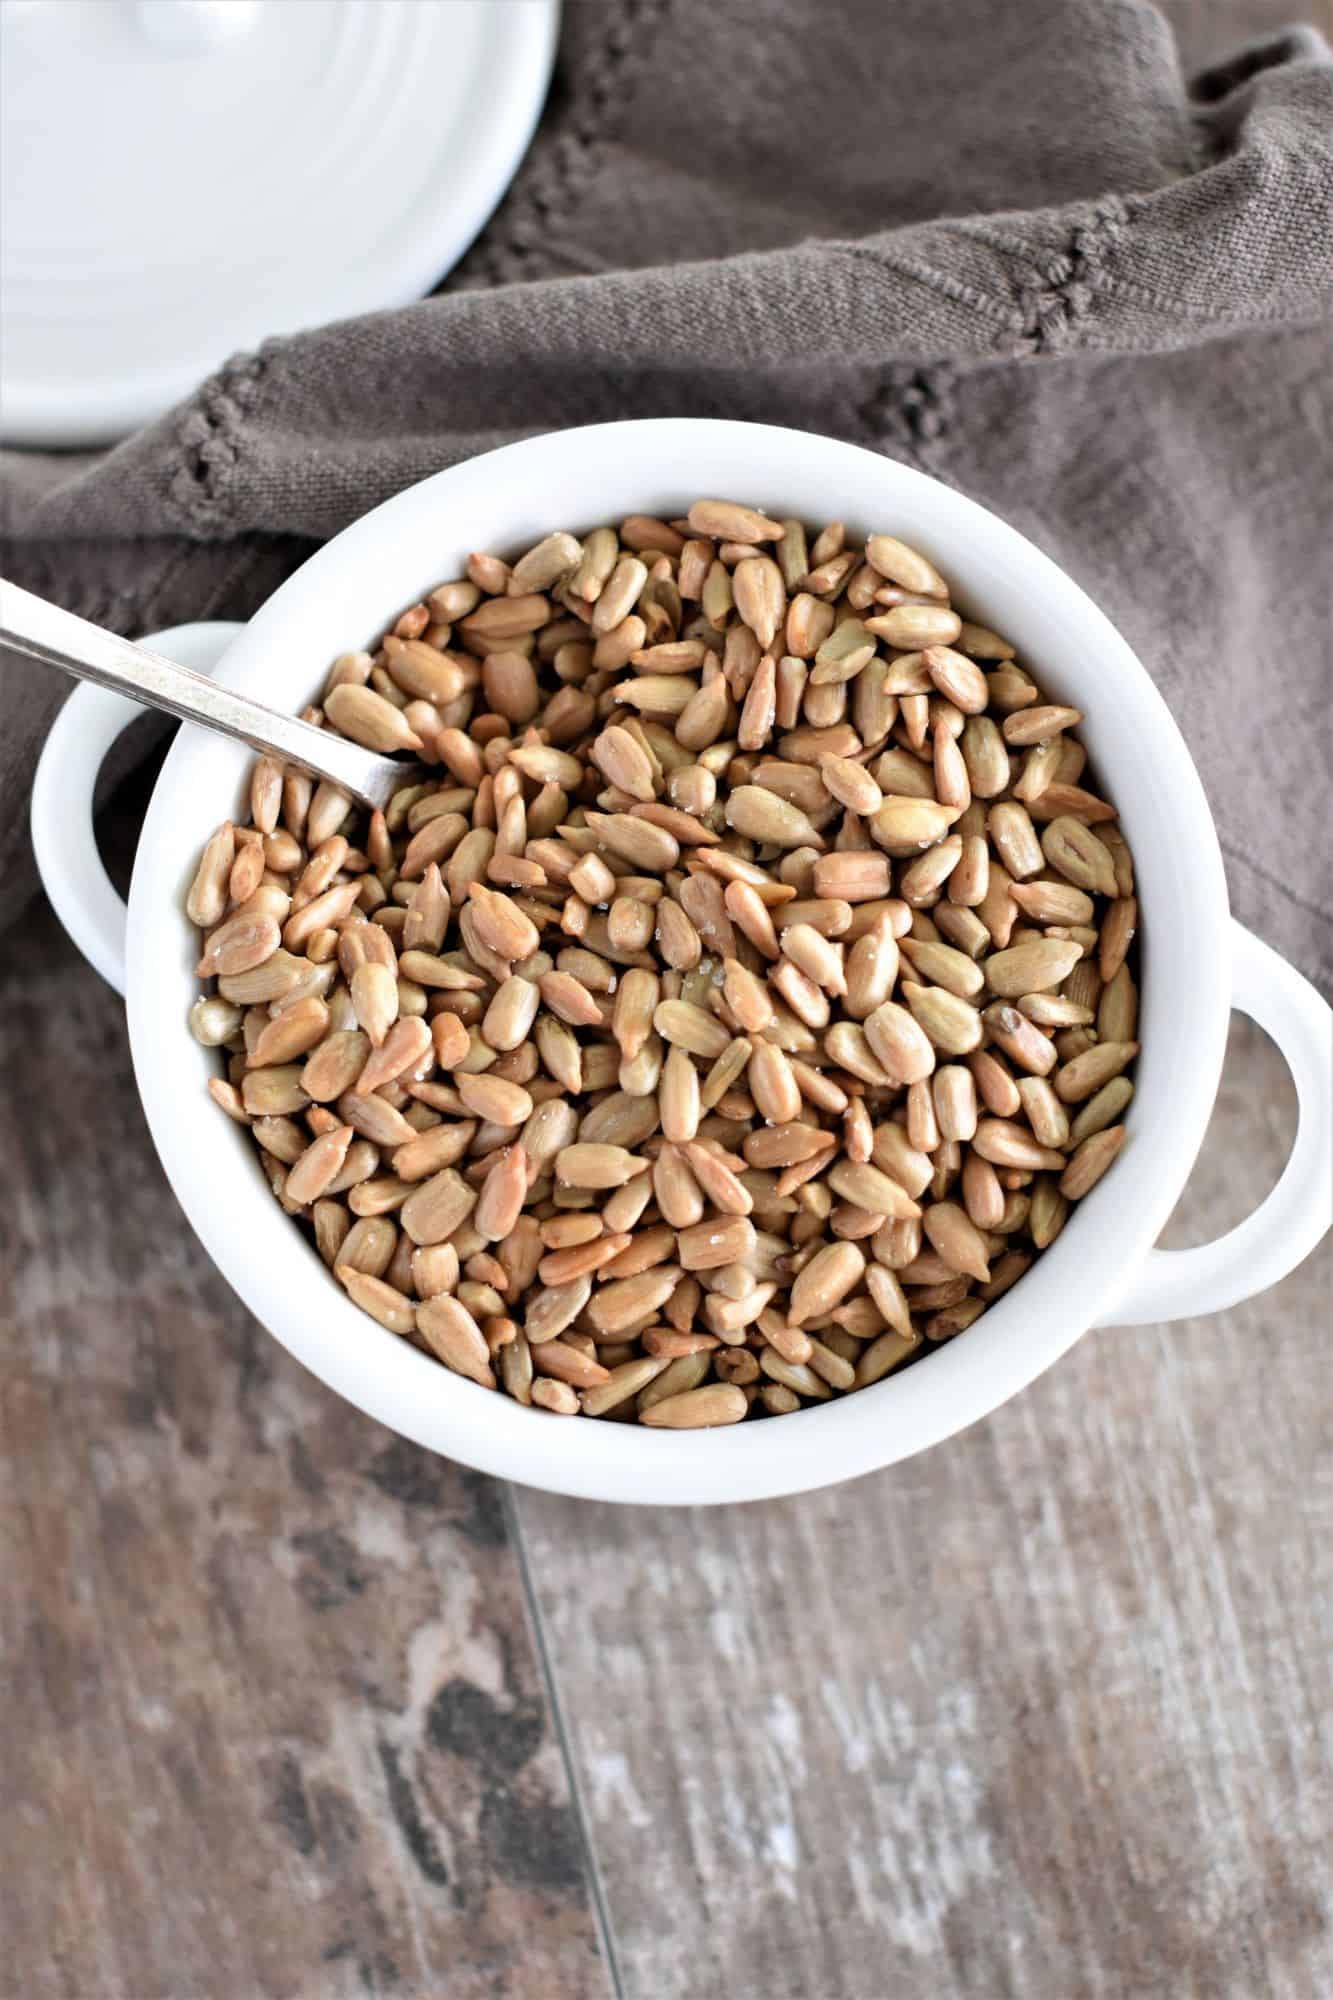 Oven roasted sunflower seeds, Easy snack recipe, Watch, Learn, Eat, Perfect crunch, 1340x2000 HD Handy